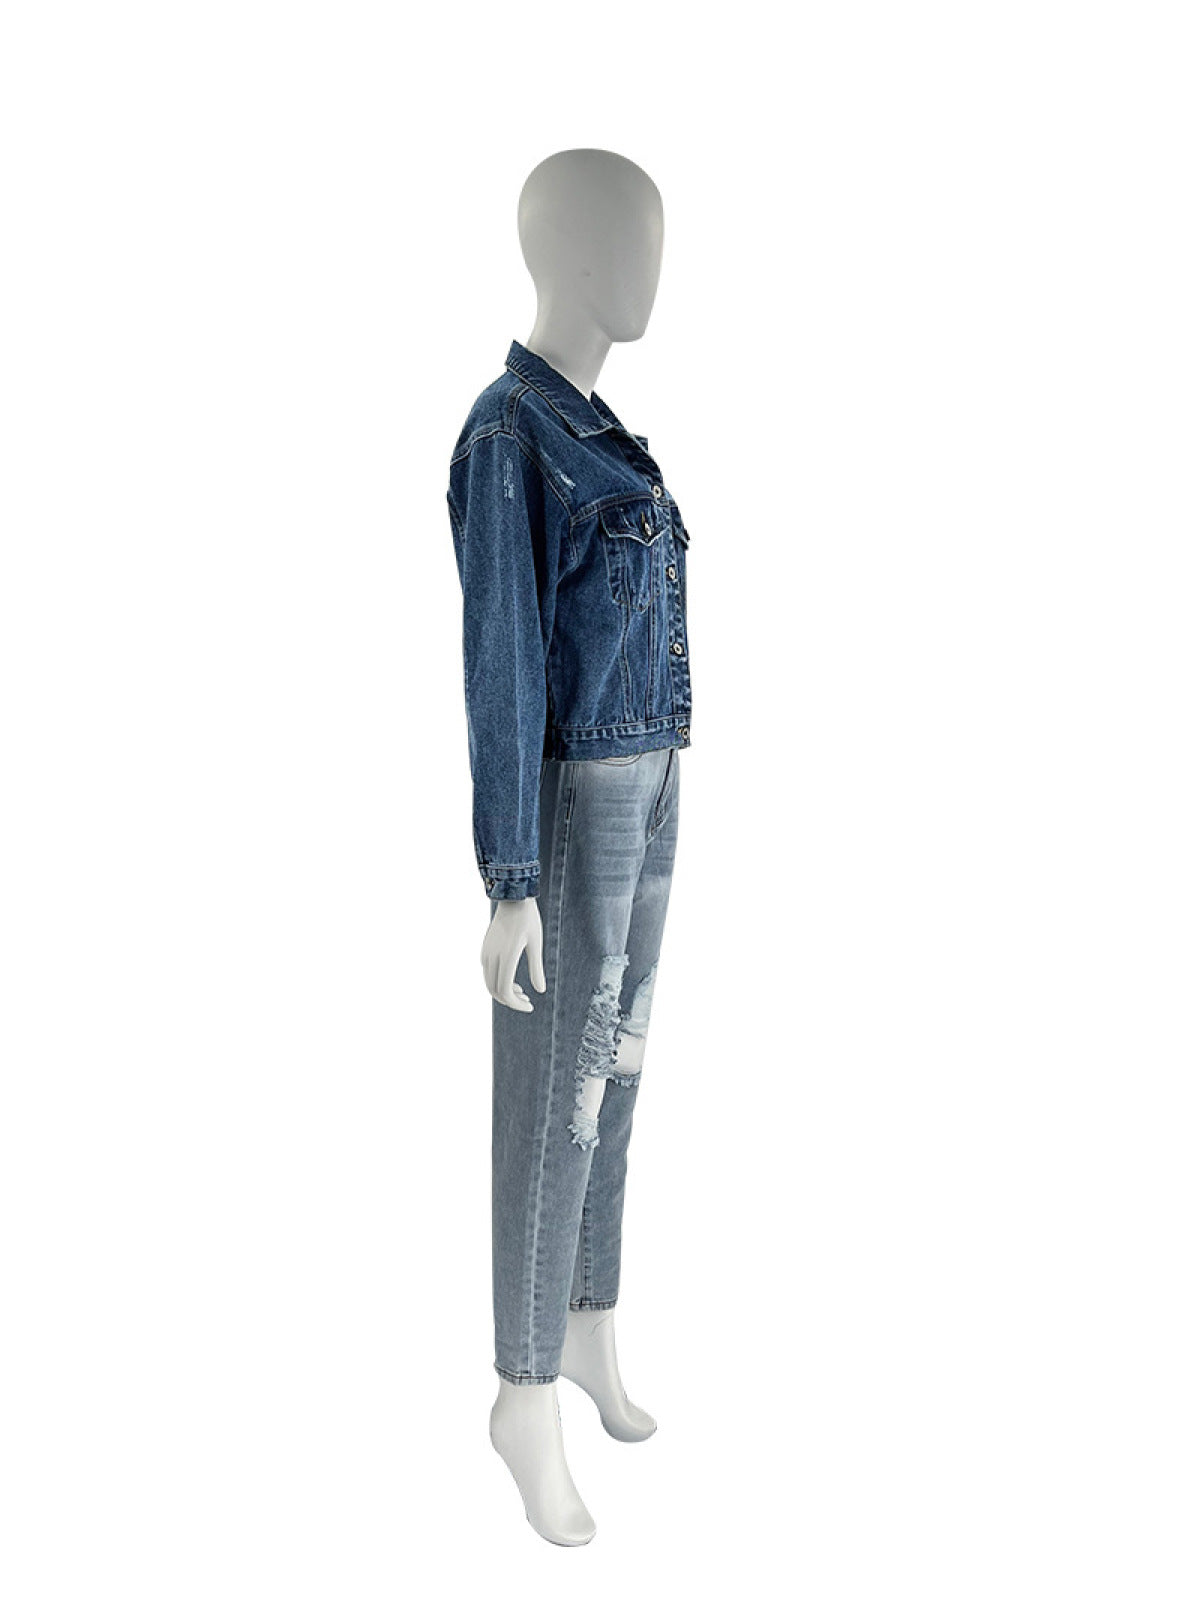 Casual Single-Breasted Denim Jacket With Pocket